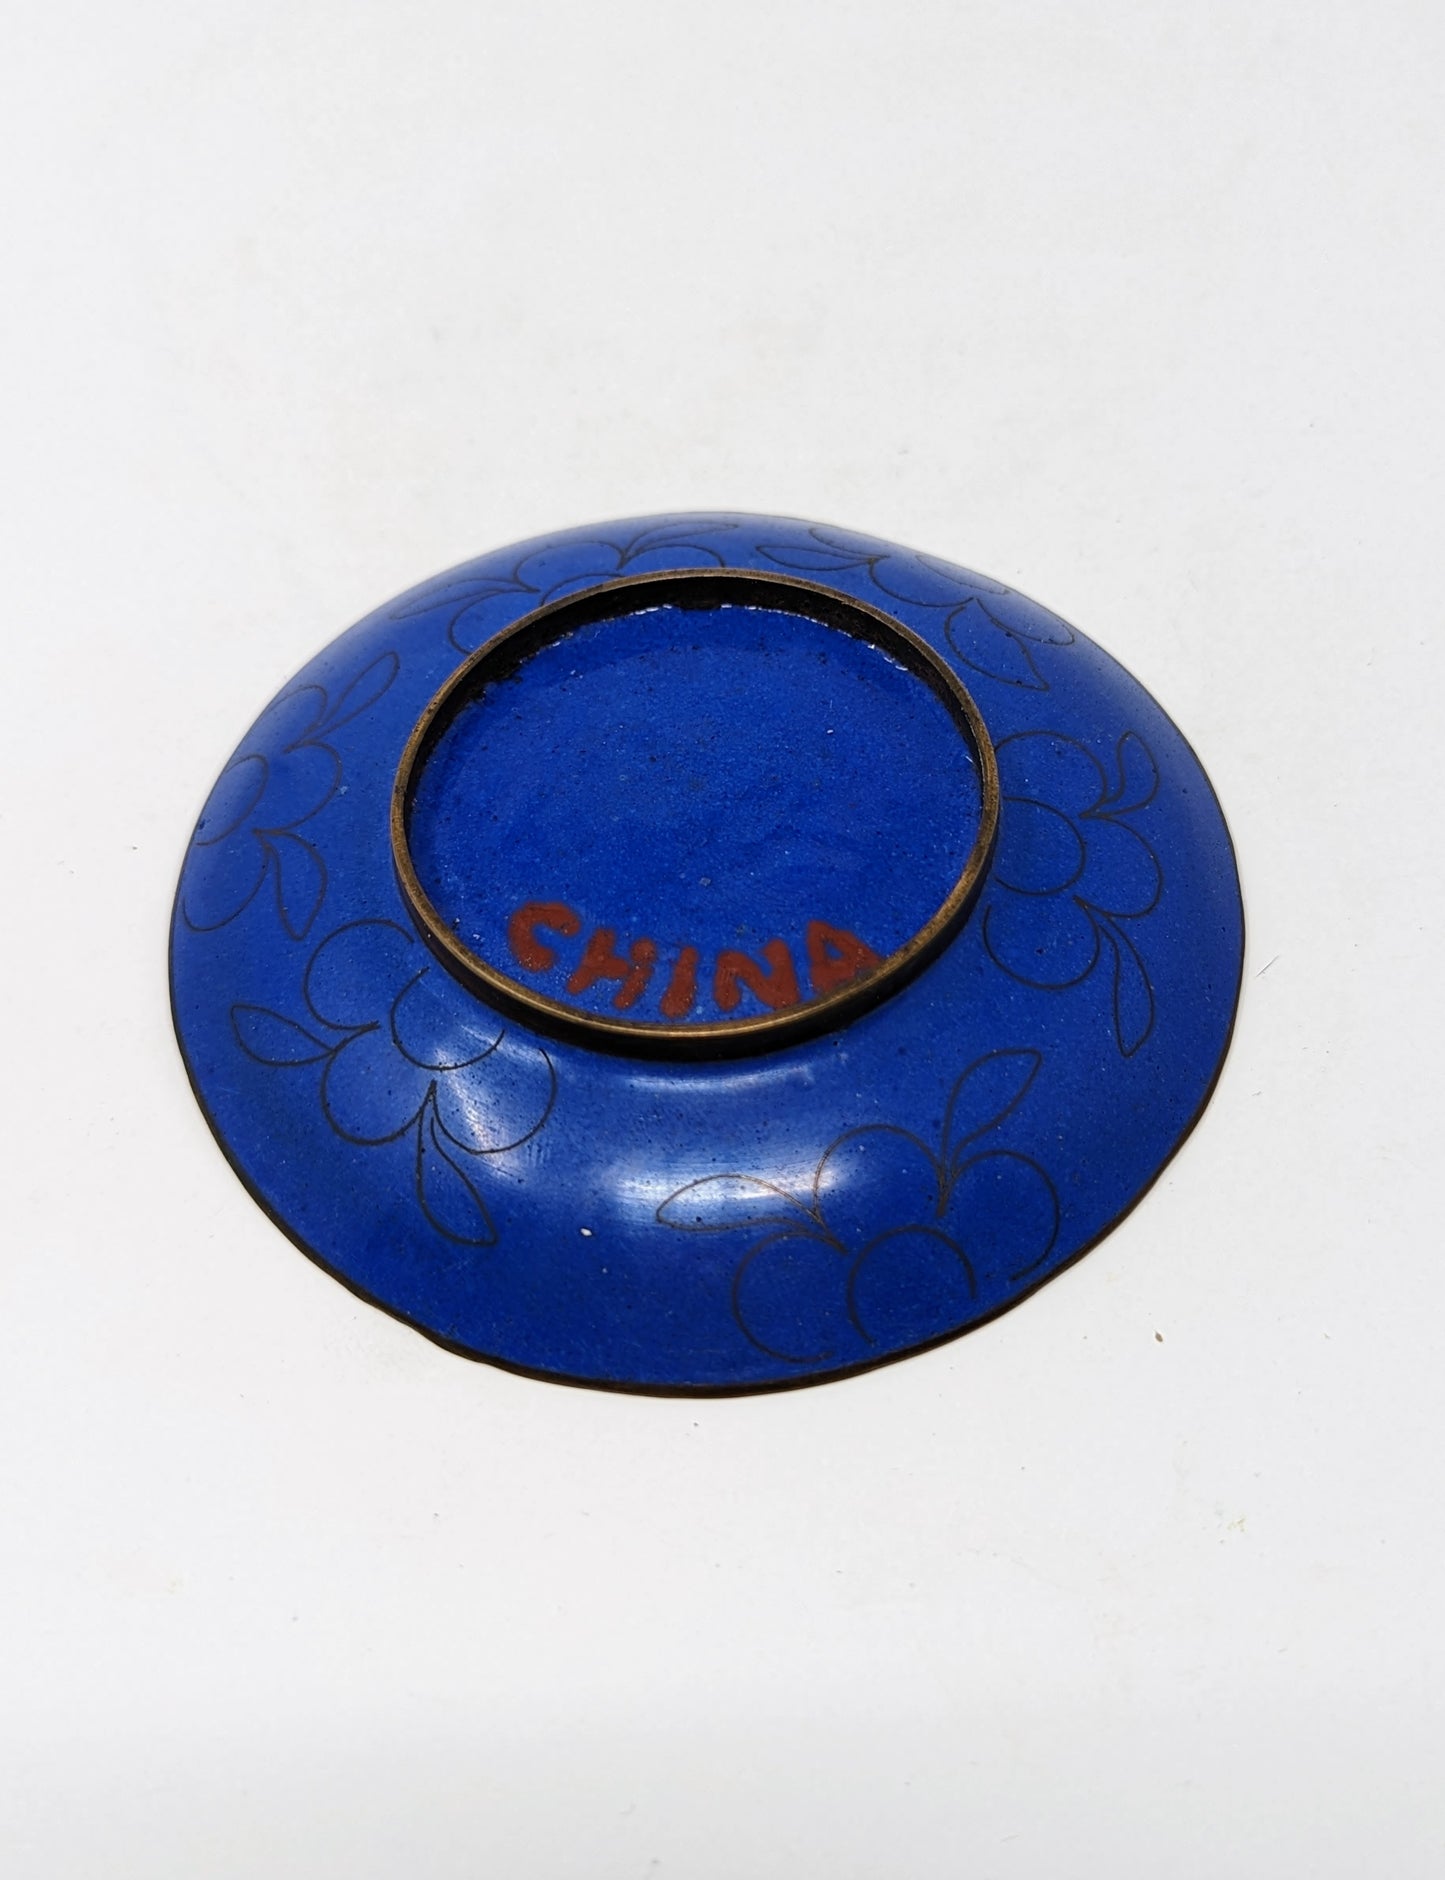 Antique Cloisonné Ashtray | Made in China (c. 1890-1910)